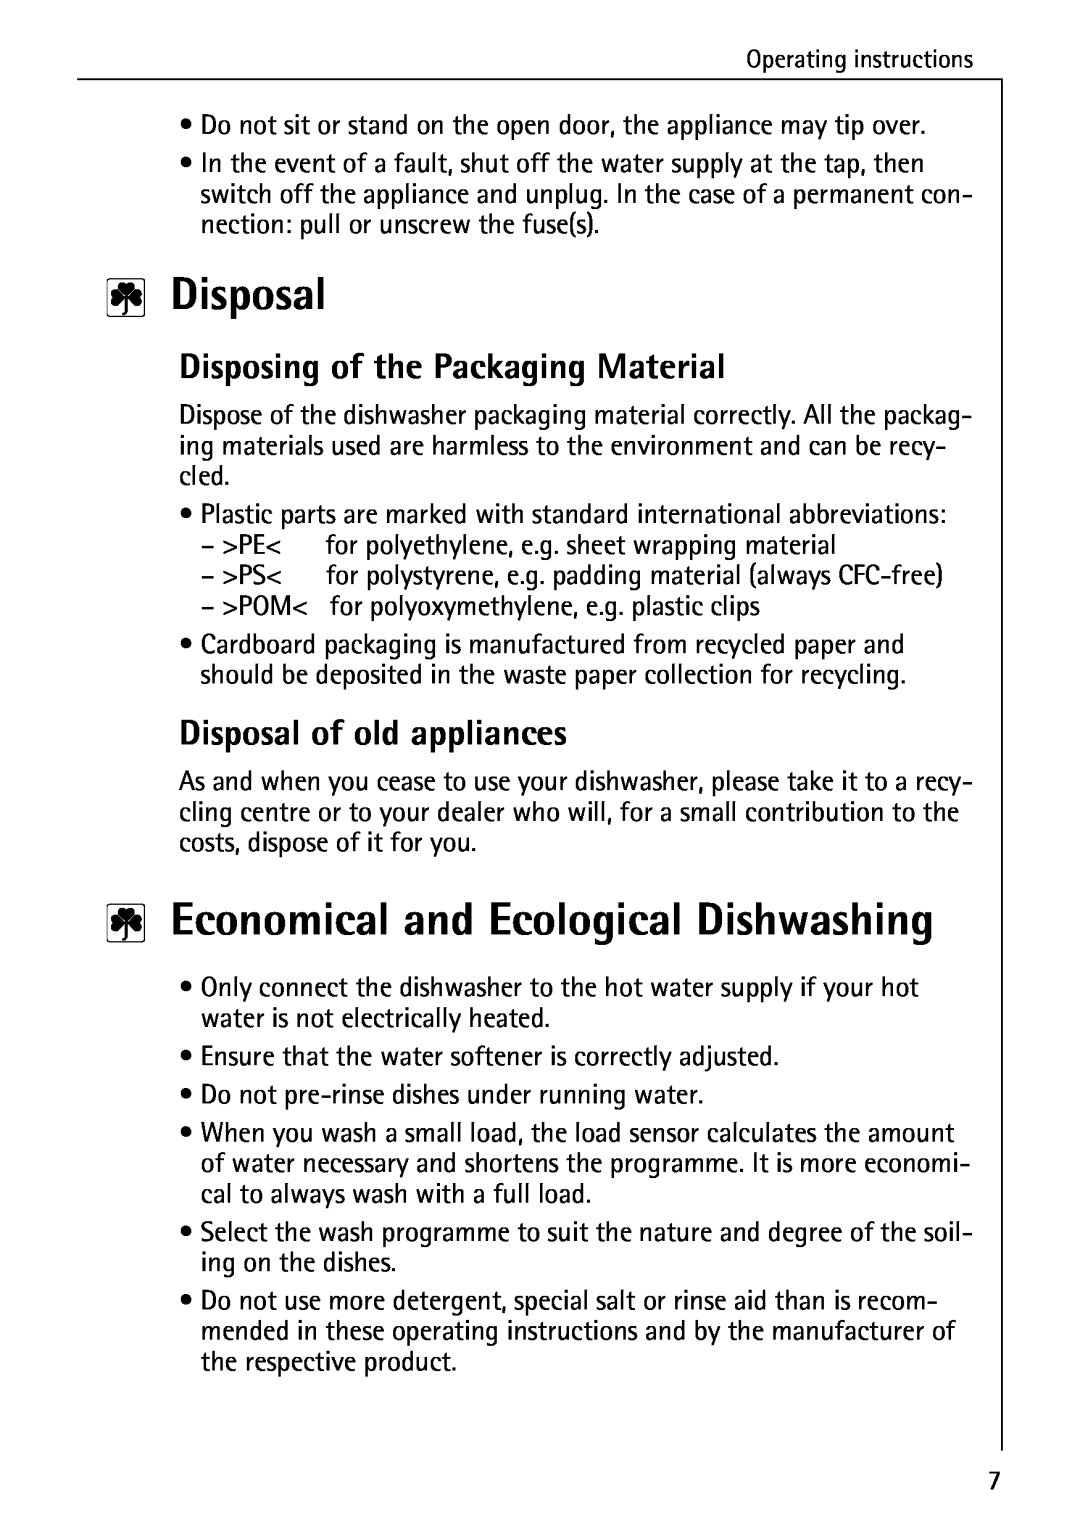 AEG 5071 manual Economical and Ecological Dishwashing, Disposing of the Packaging Material, Disposal of old appliances 